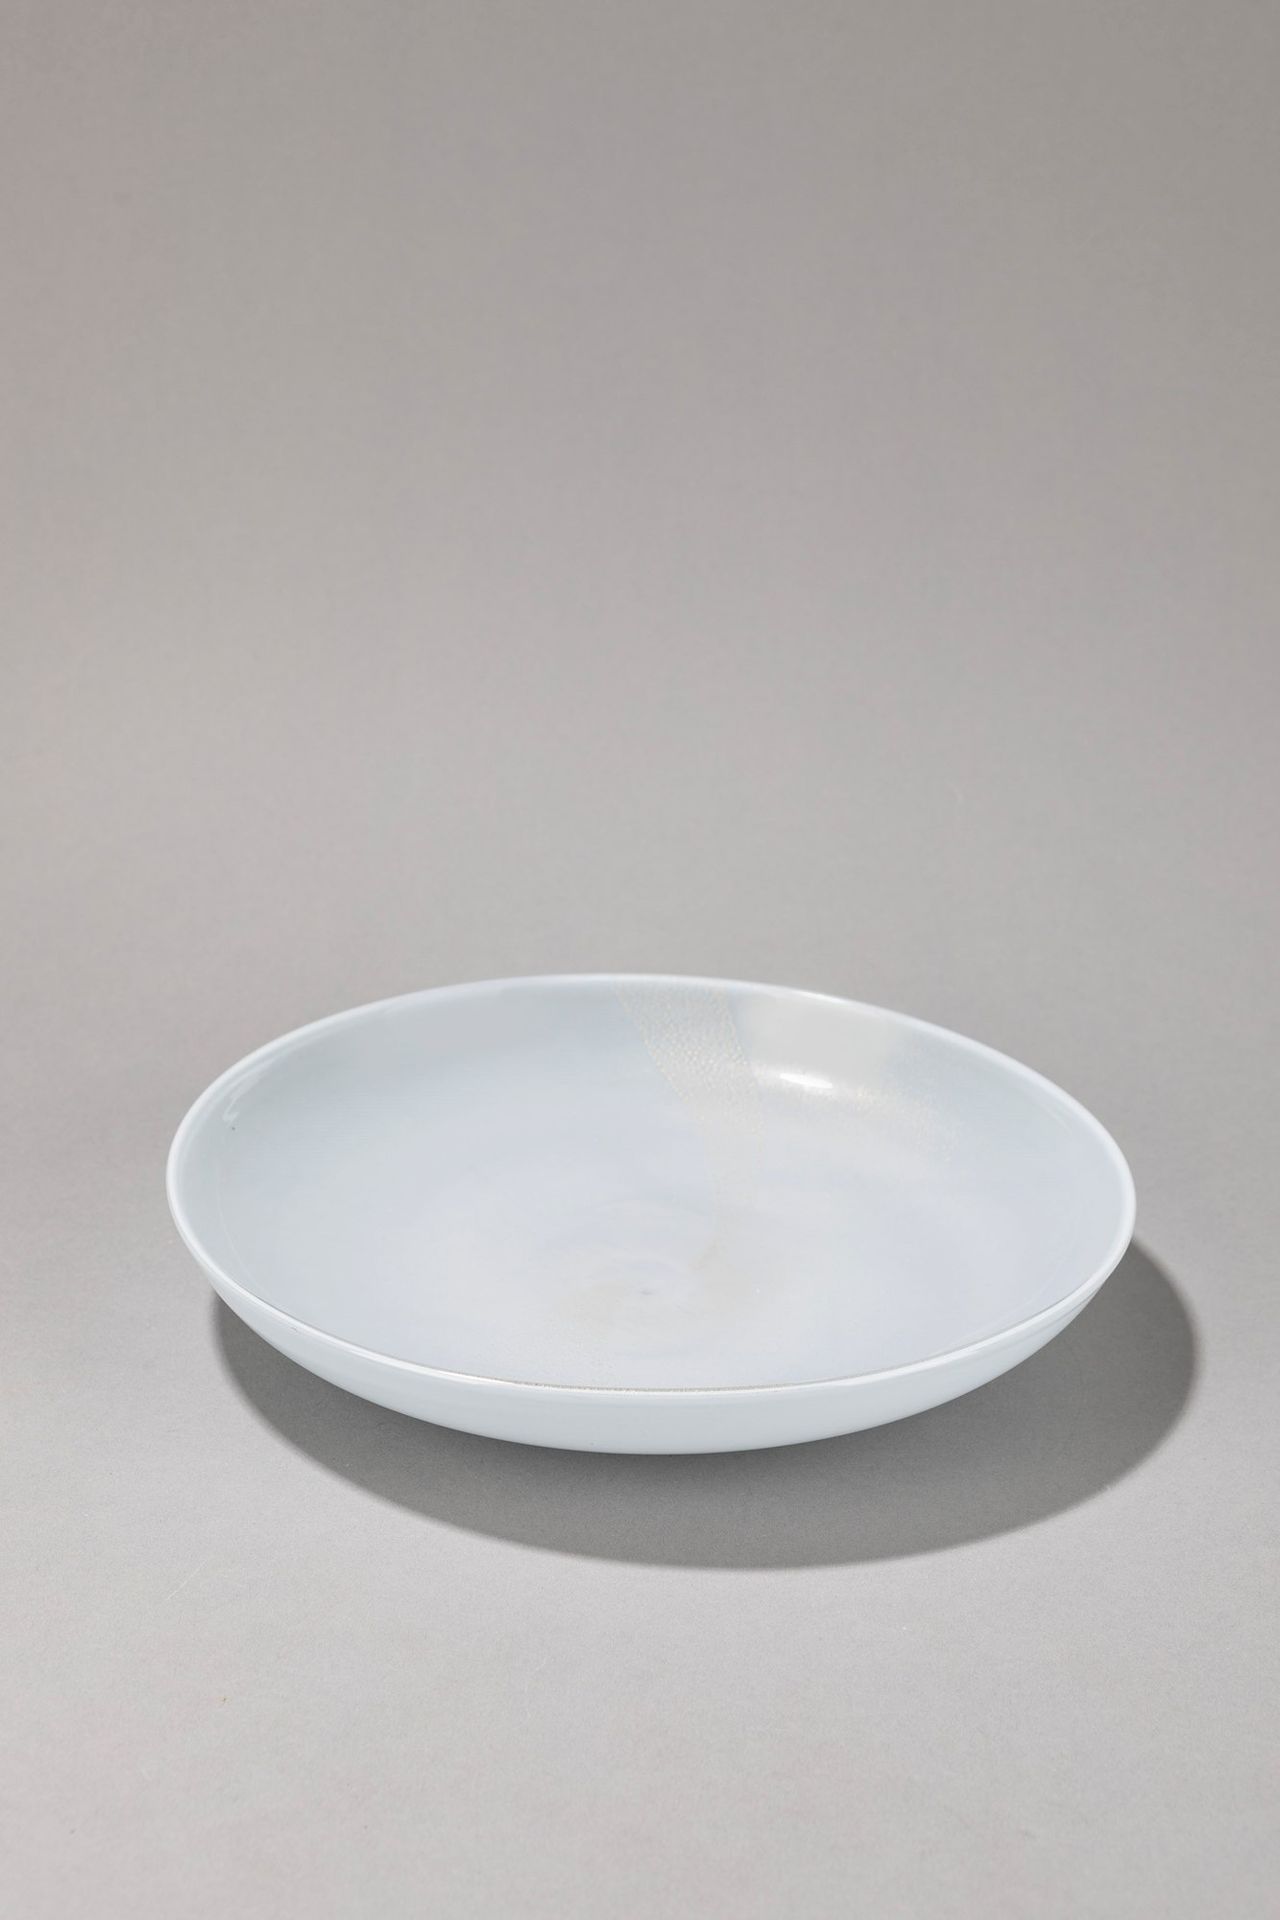 Archimede Seguso Plate, 1960 ca.

Diam 25,5 cm
blown glass with golden inserts.
&hellip;